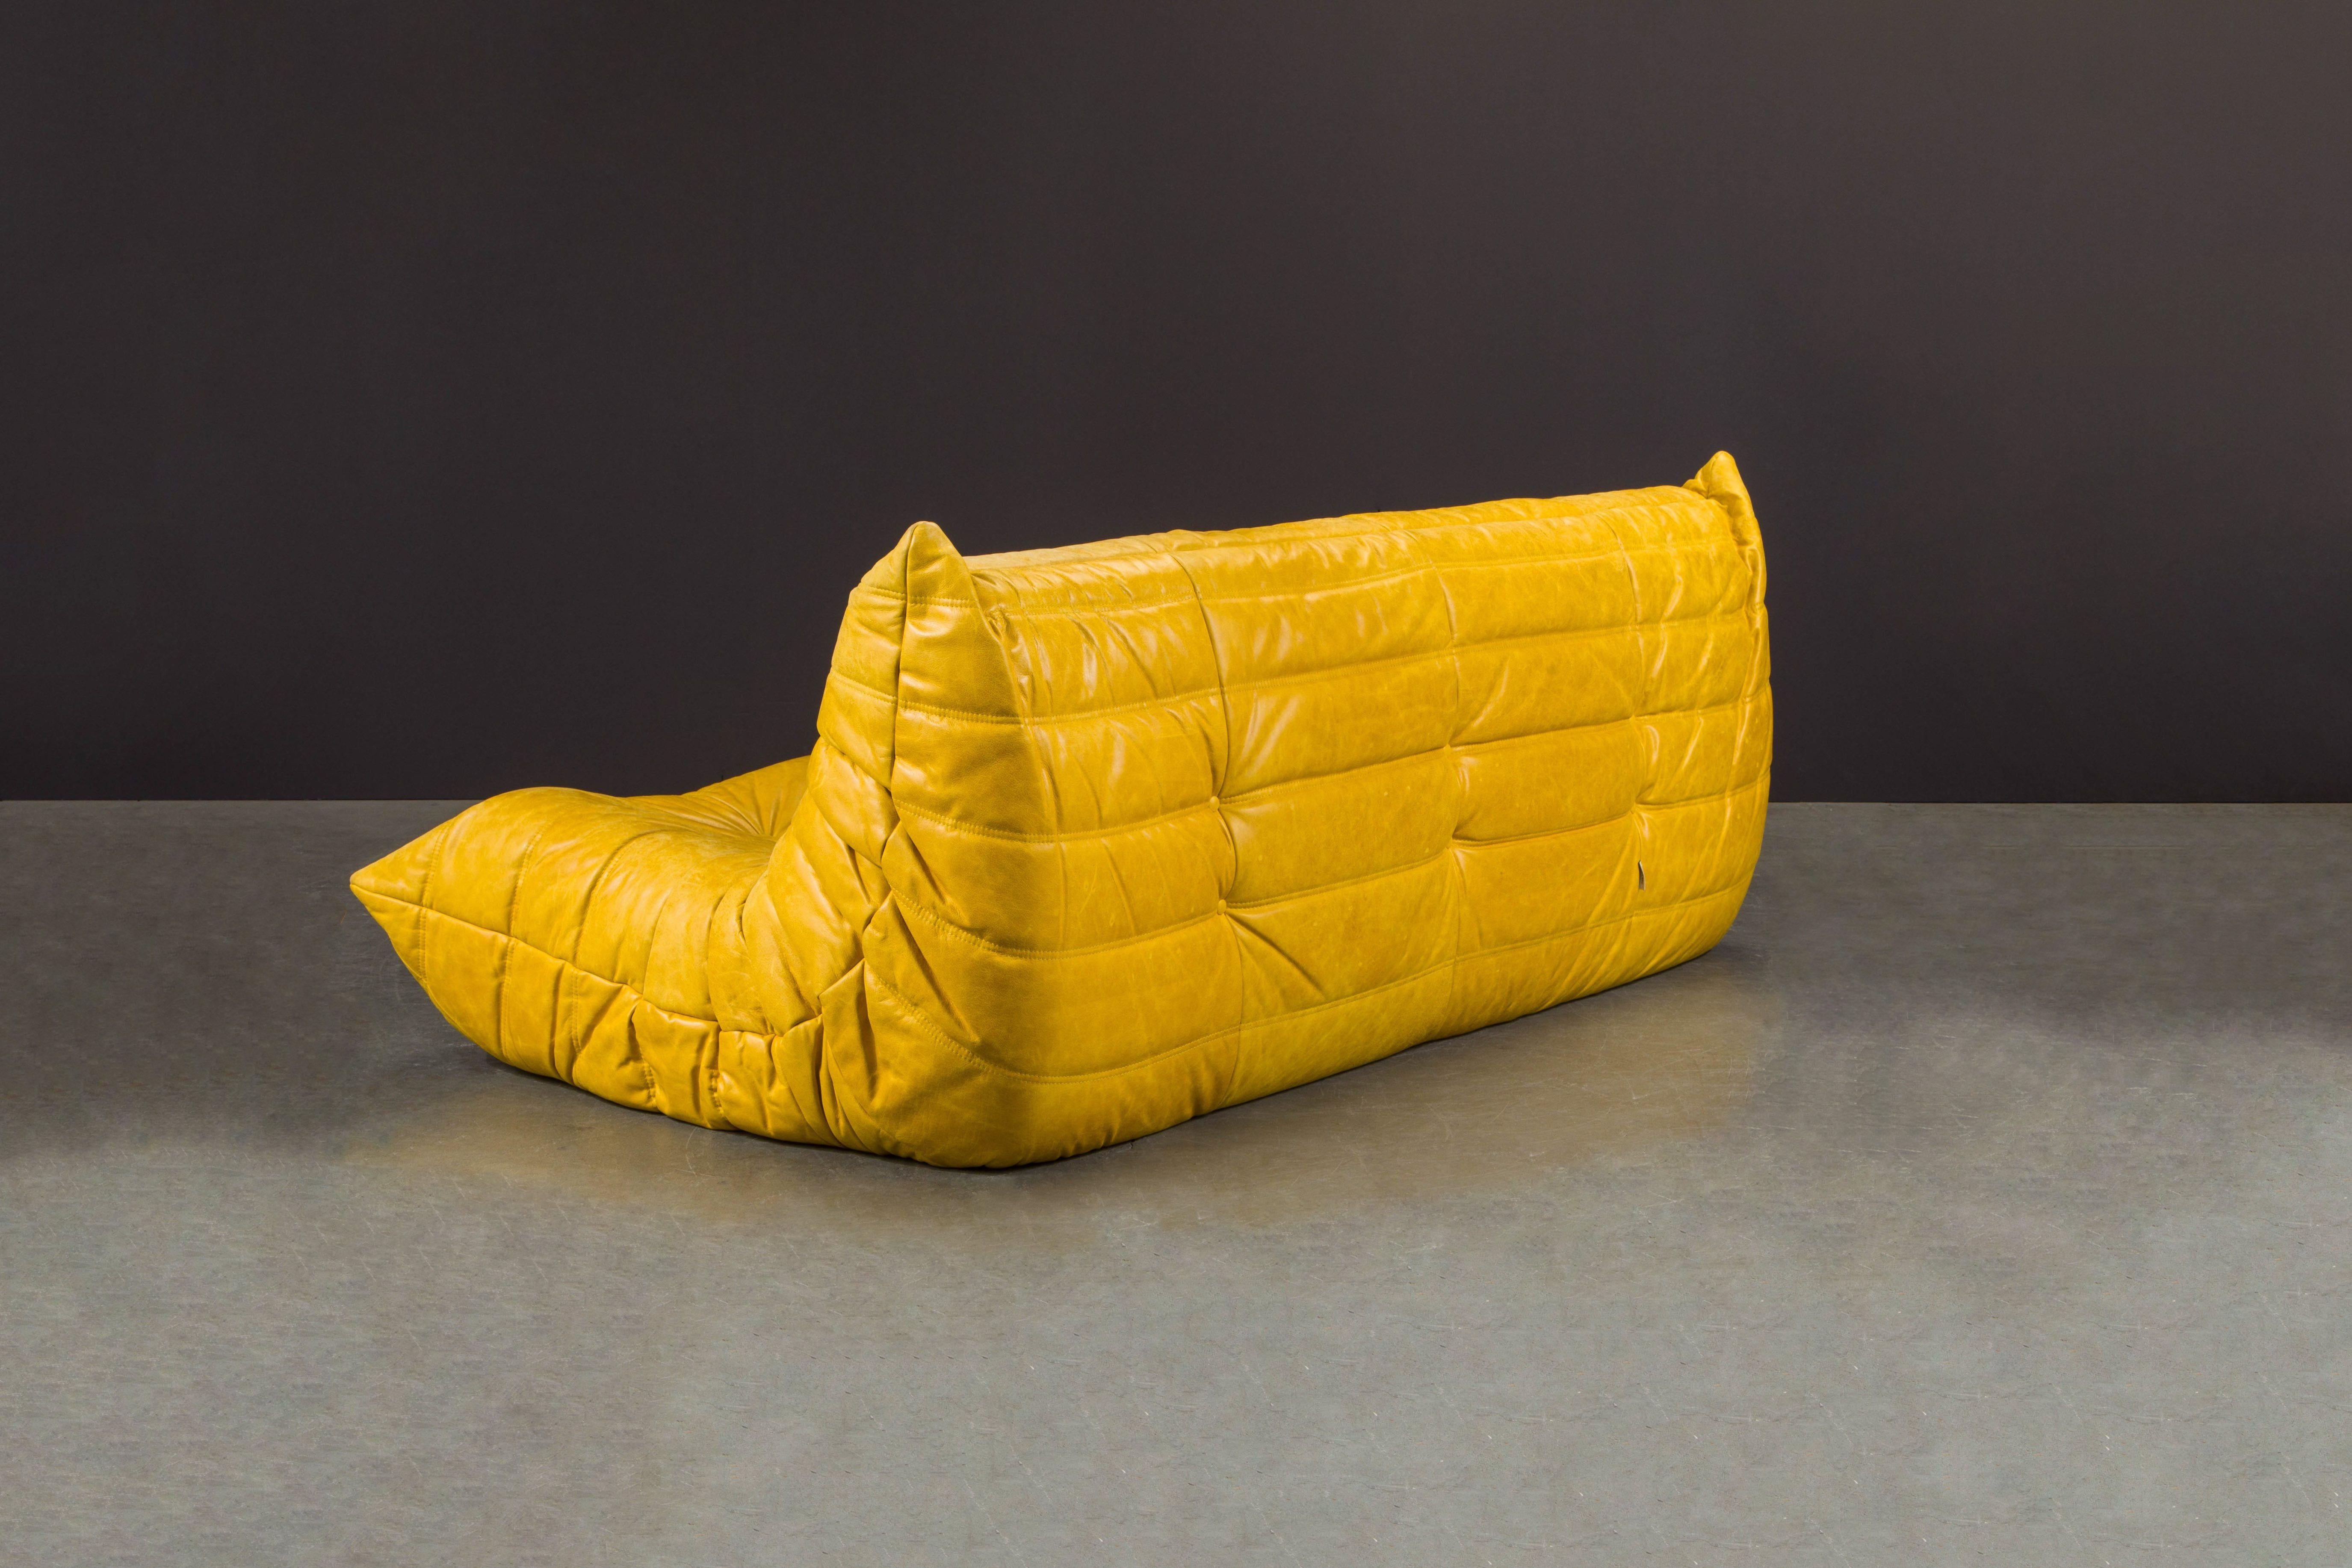 Late 20th Century Yellow Leather 'Togo' Three Seat Sofa by Michel Ducaroy for Ligne Roset, Signed